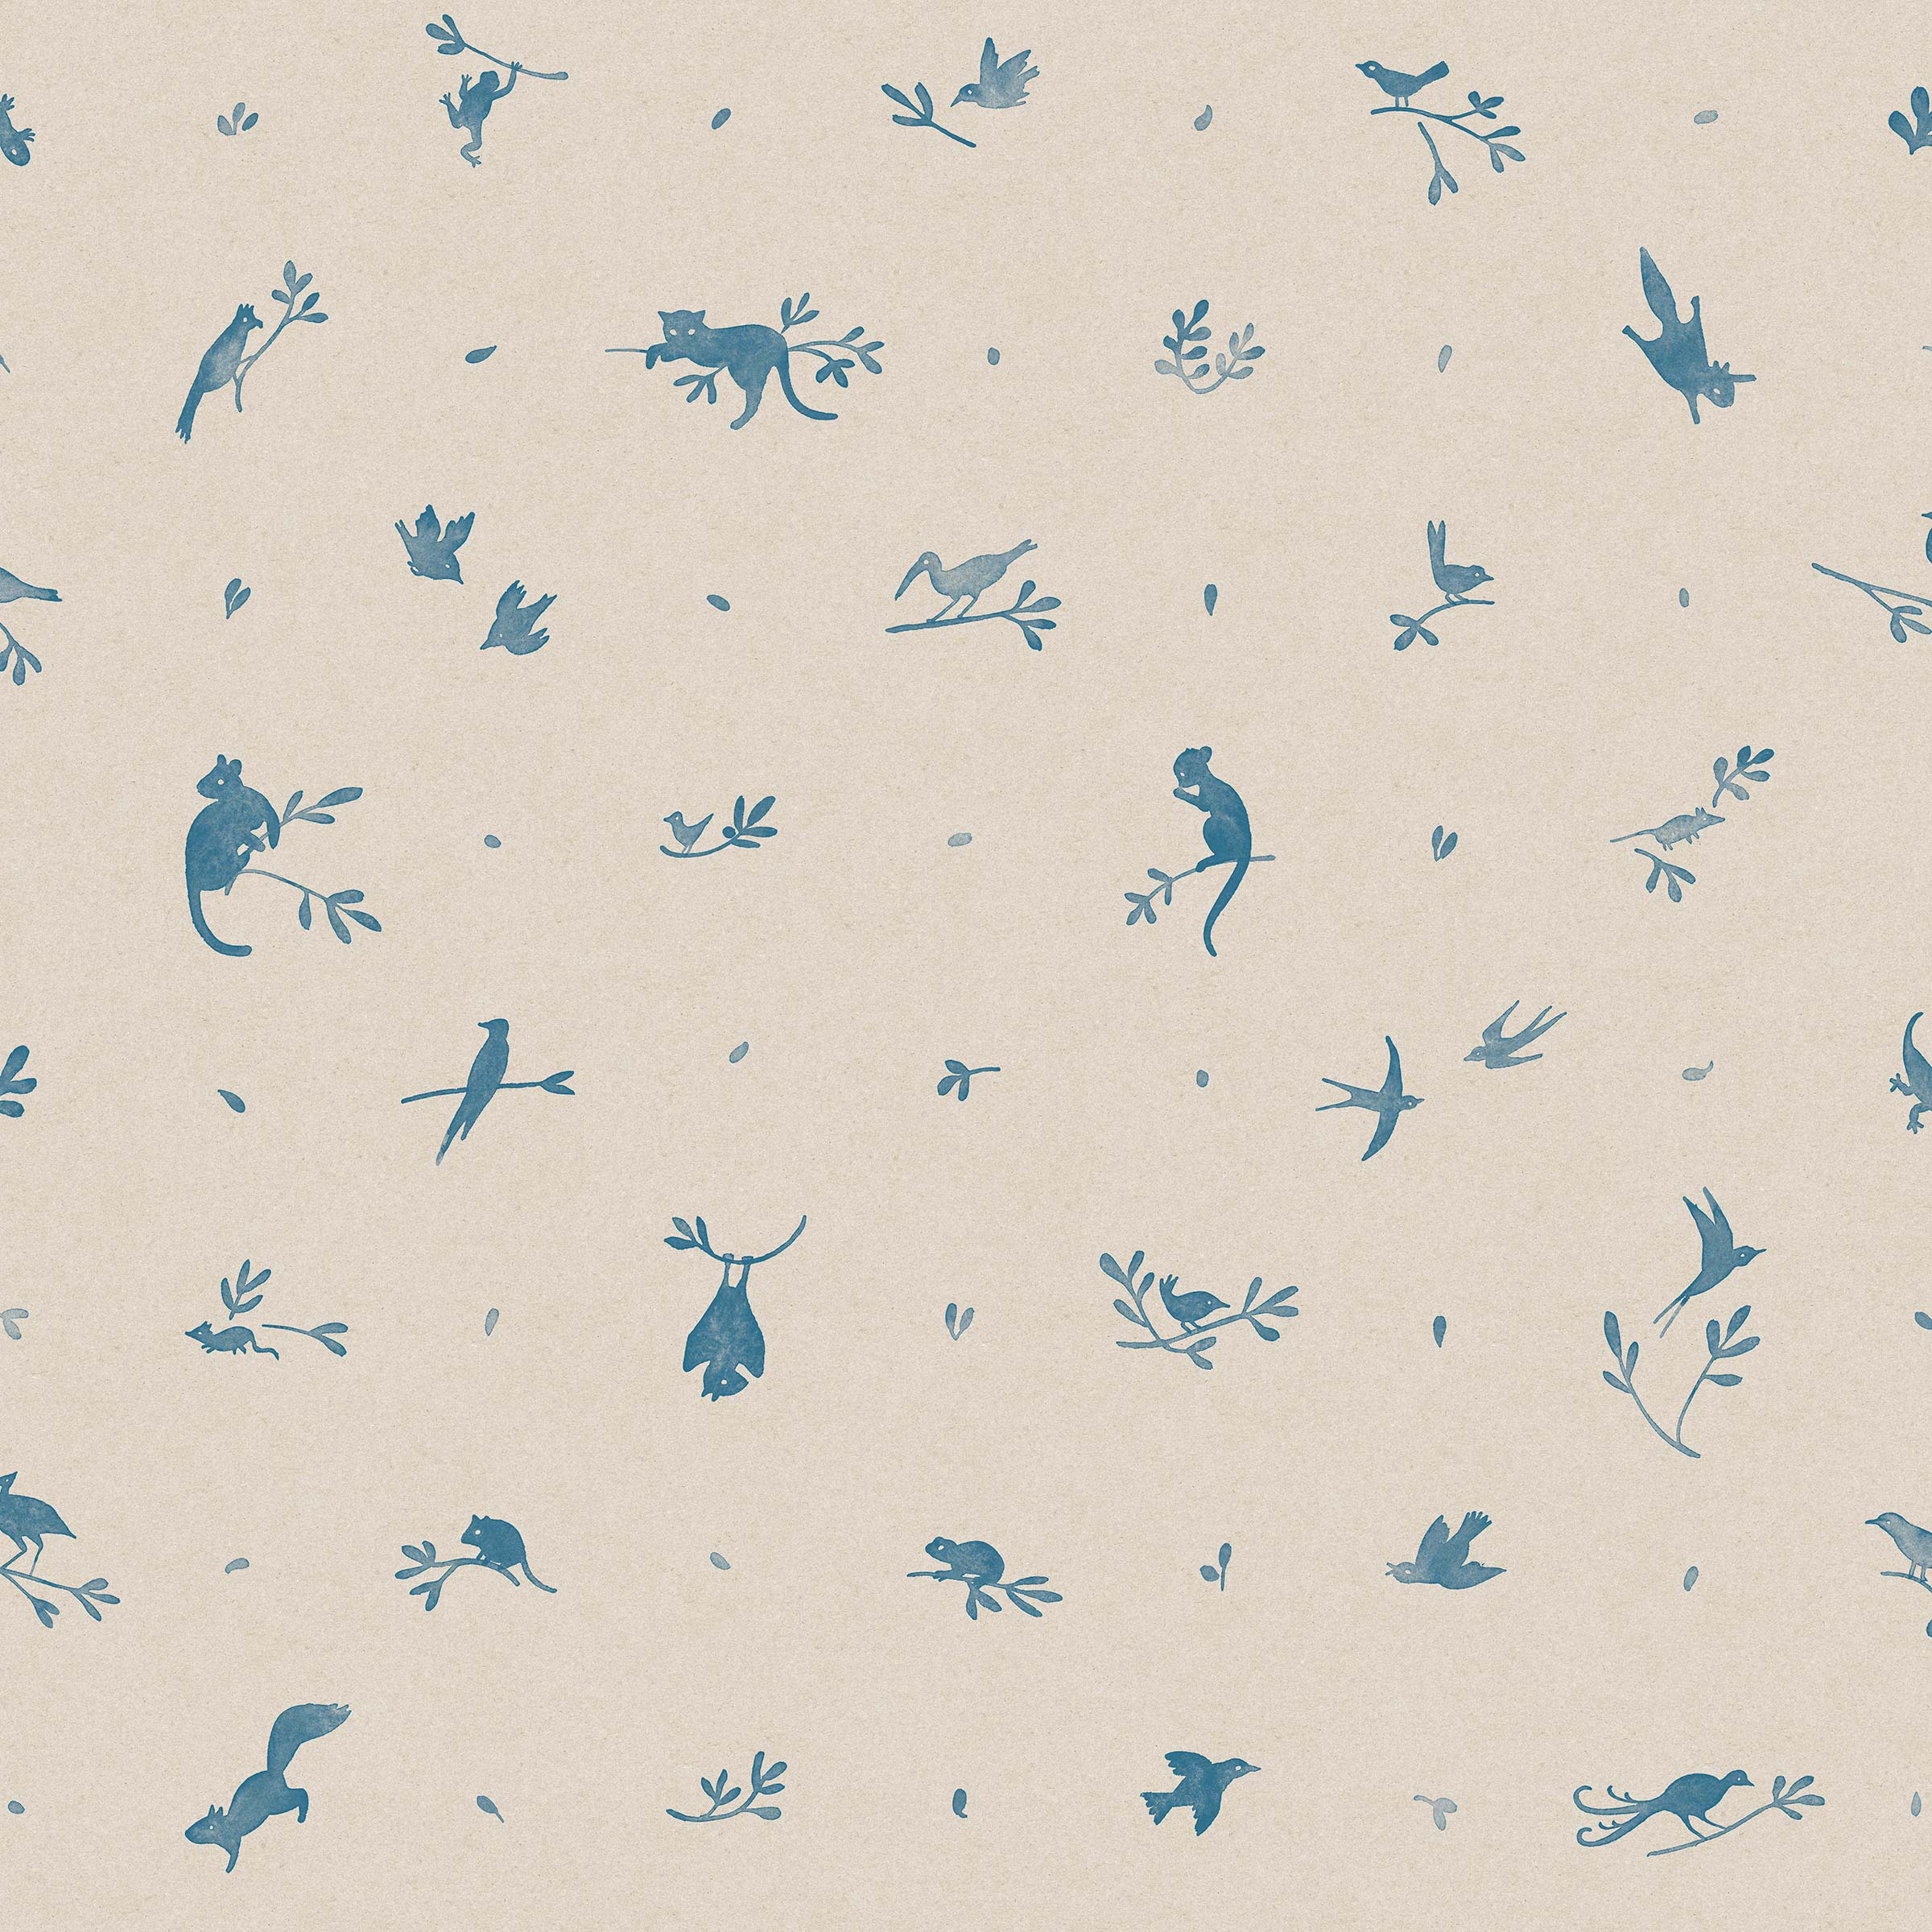 Detail of wallpaper in a playful animal and branch print in blue on a cream field.